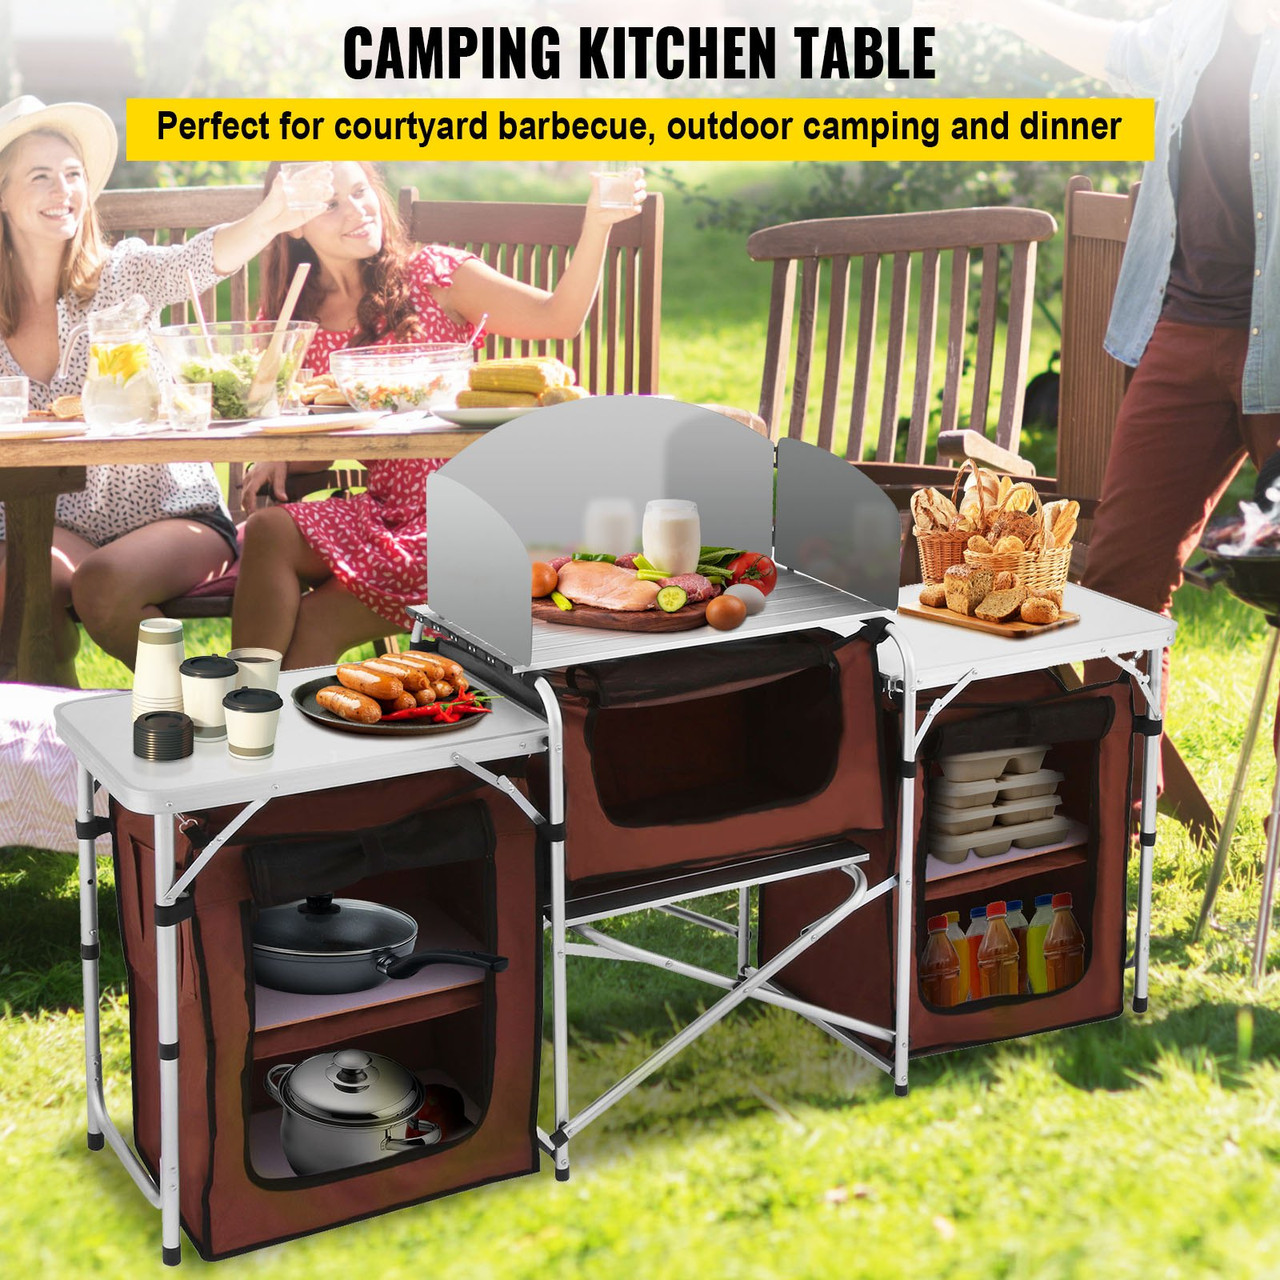 Camping Kitchen Table, 3 Storage Organizer, Aluminum Windscreen Outdoor Folding Grill Station with 2 Side Tables, Camping Supplies and Accessories